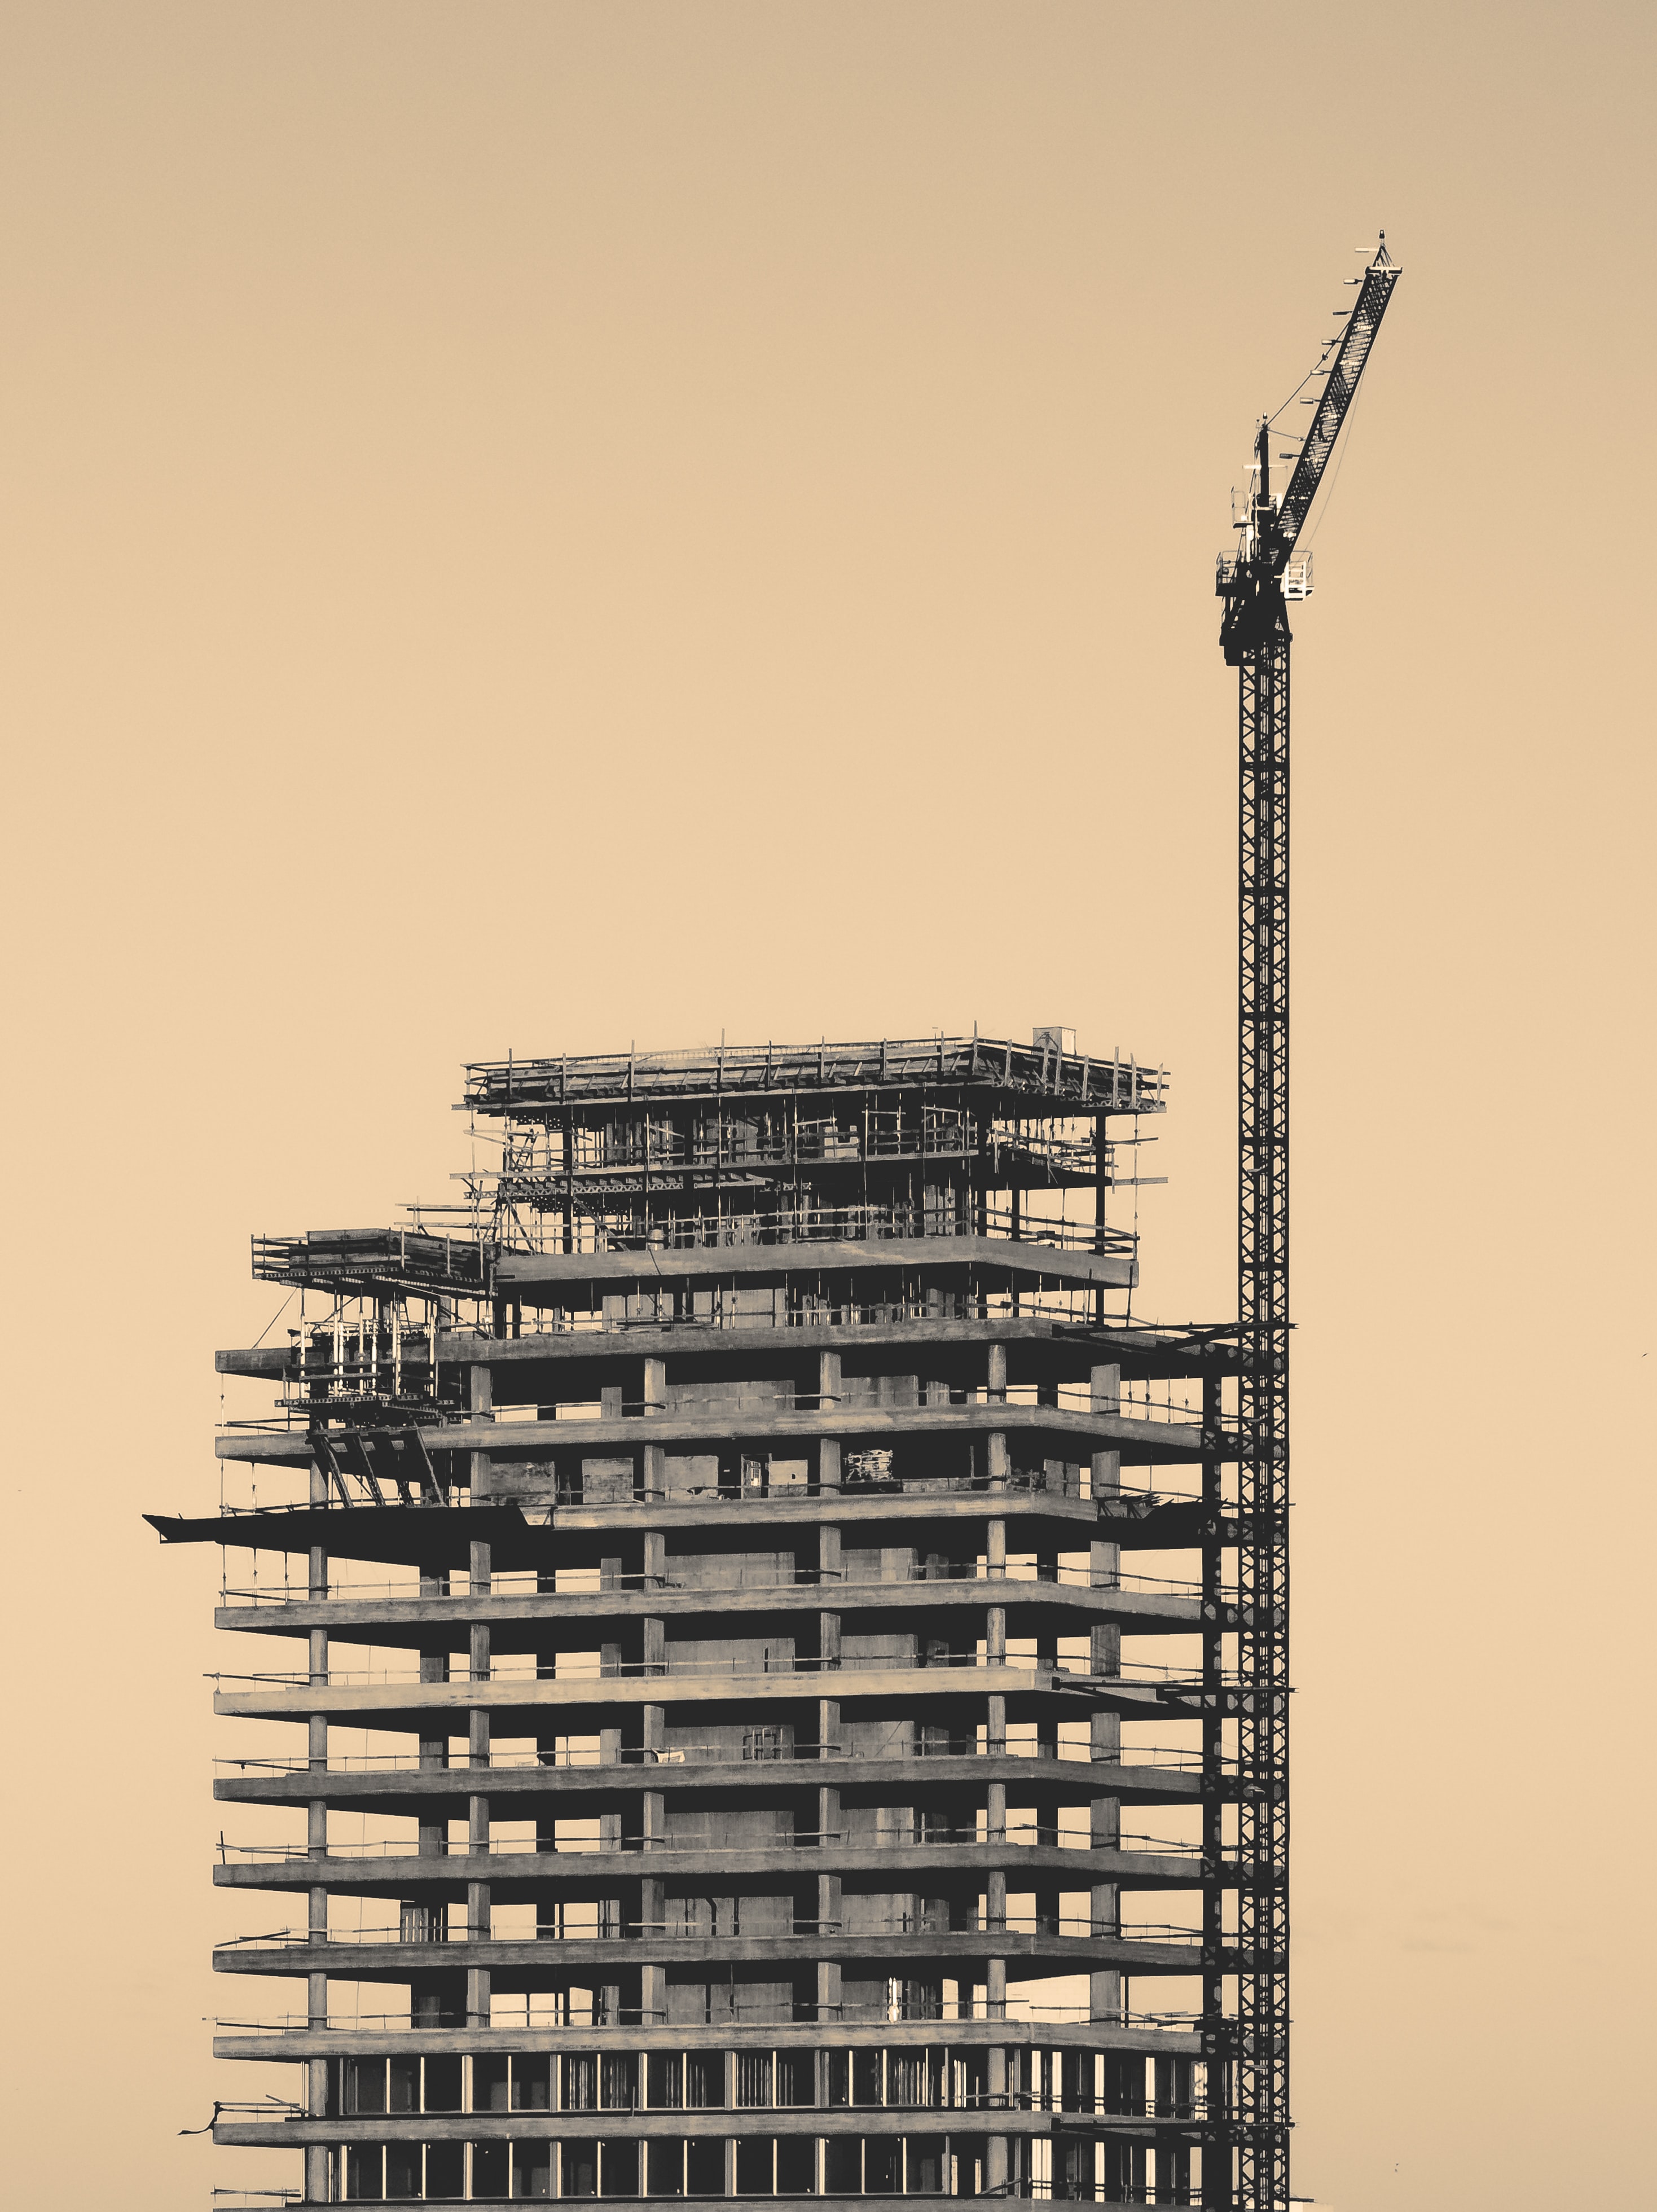 Best Construction Background for mobile